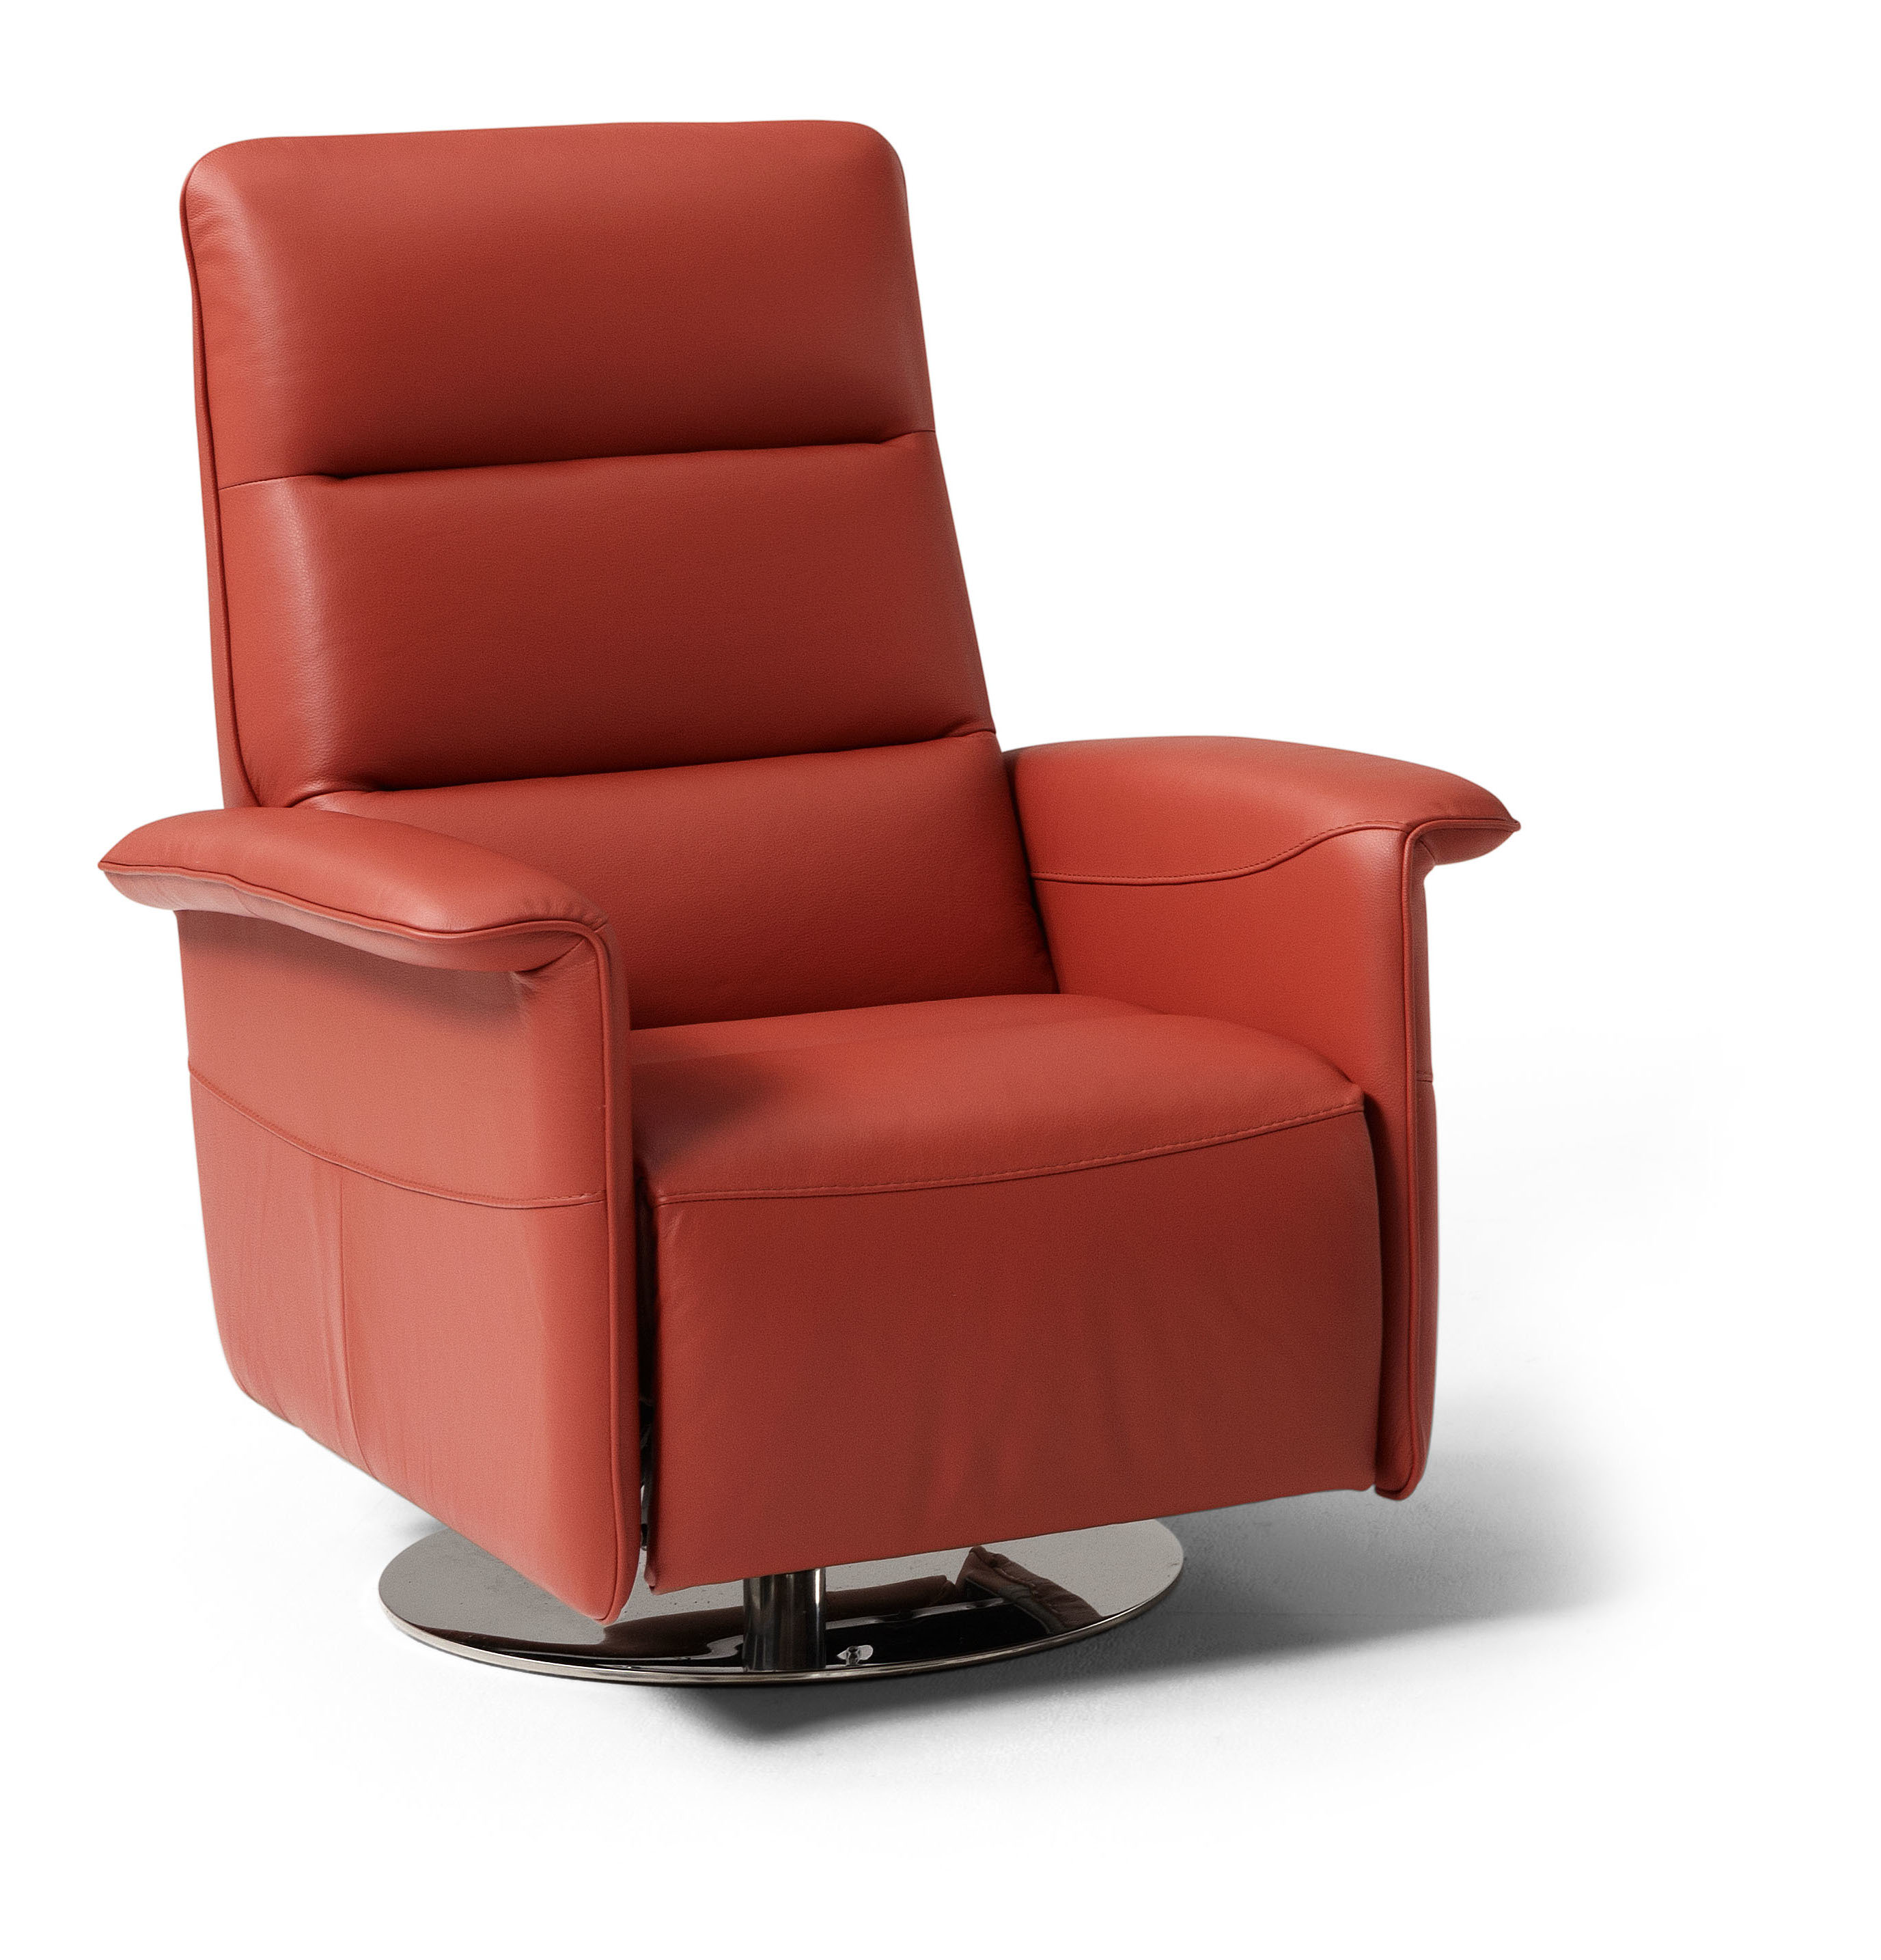 Carrie Leather Swivel Chair